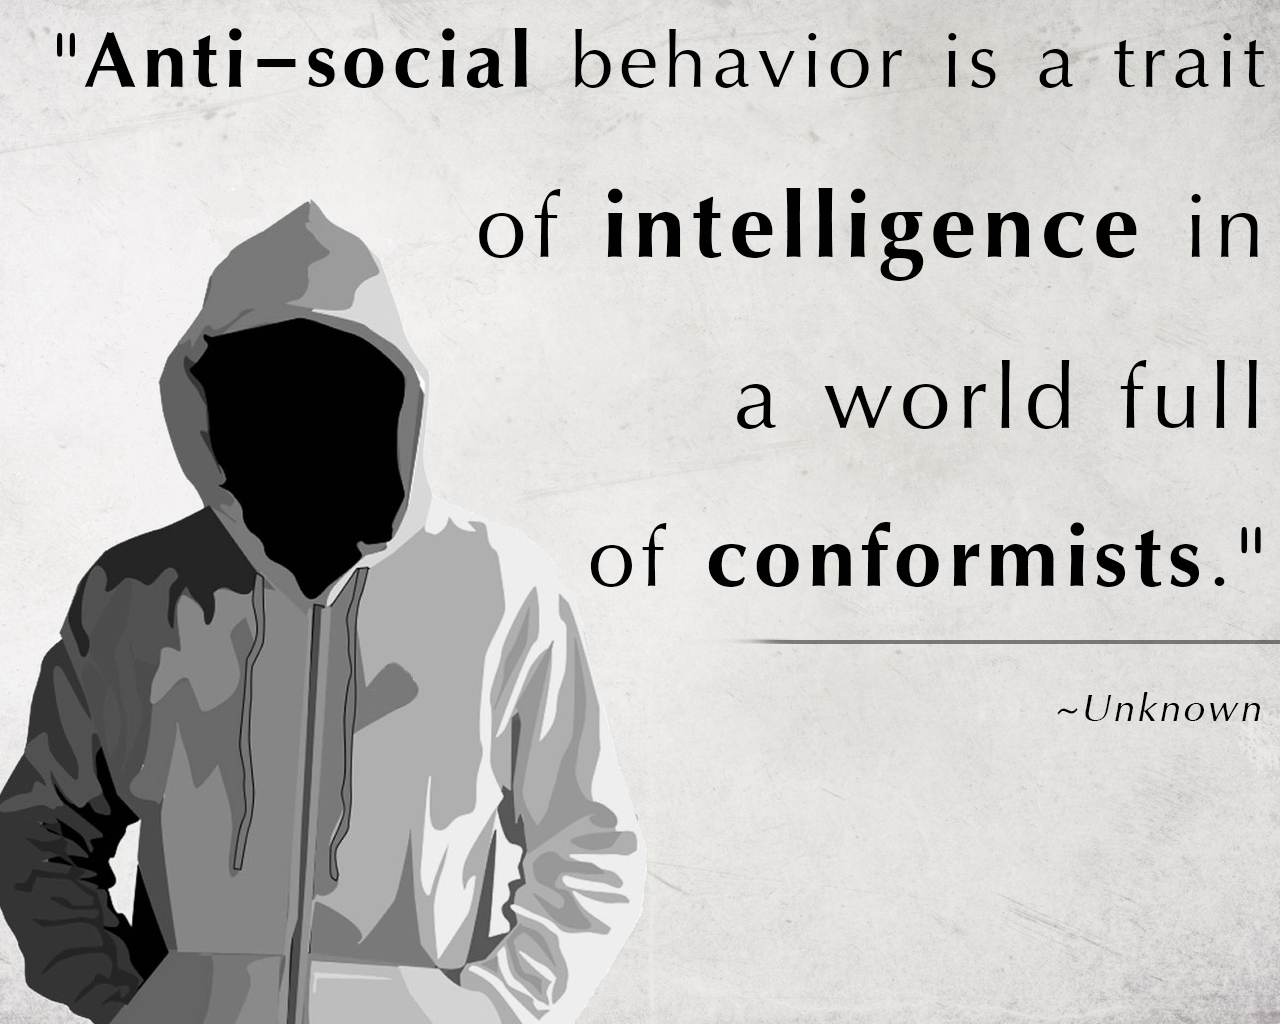 Anti-social behavior is a trait of intelligence in a world full of